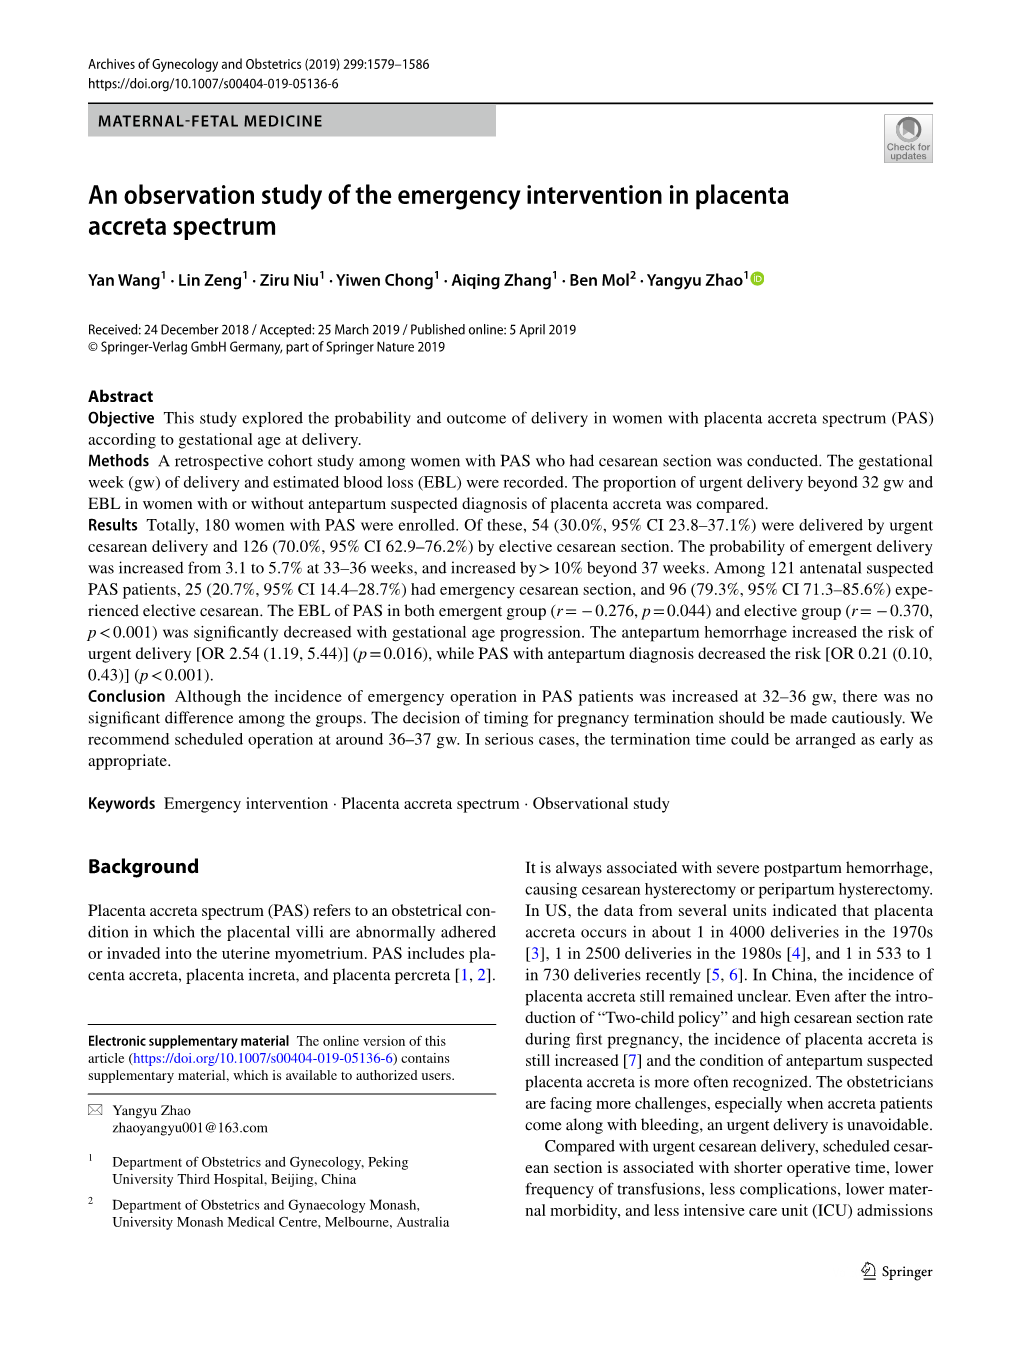 An Observation Study of the Emergency Intervention in Placenta Accreta Spectrum